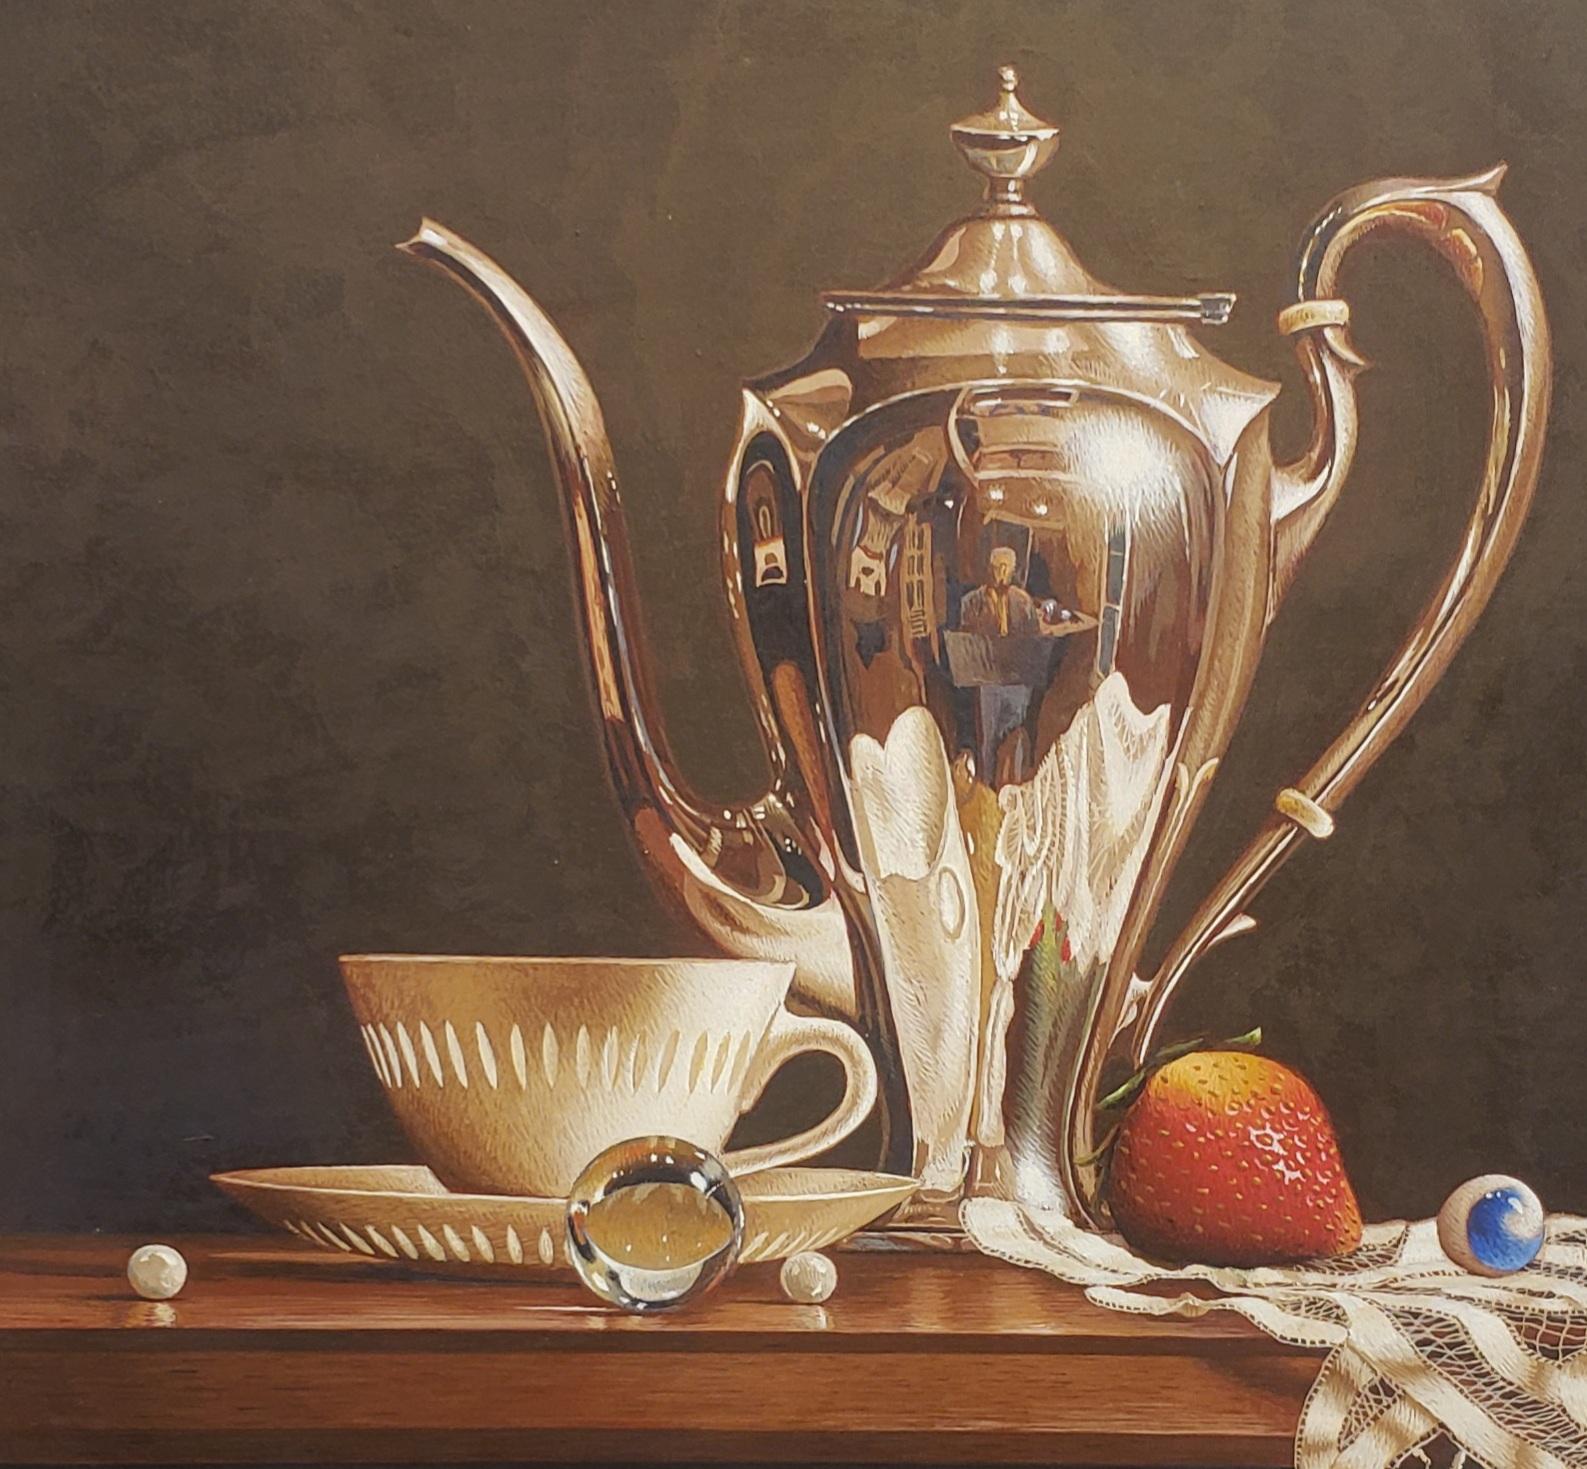   Coffee Cup w/Pearl, Egg Tempera,  Realism,  3D Appearance, American Artist - Brown Still-Life Painting by Mark Thompson